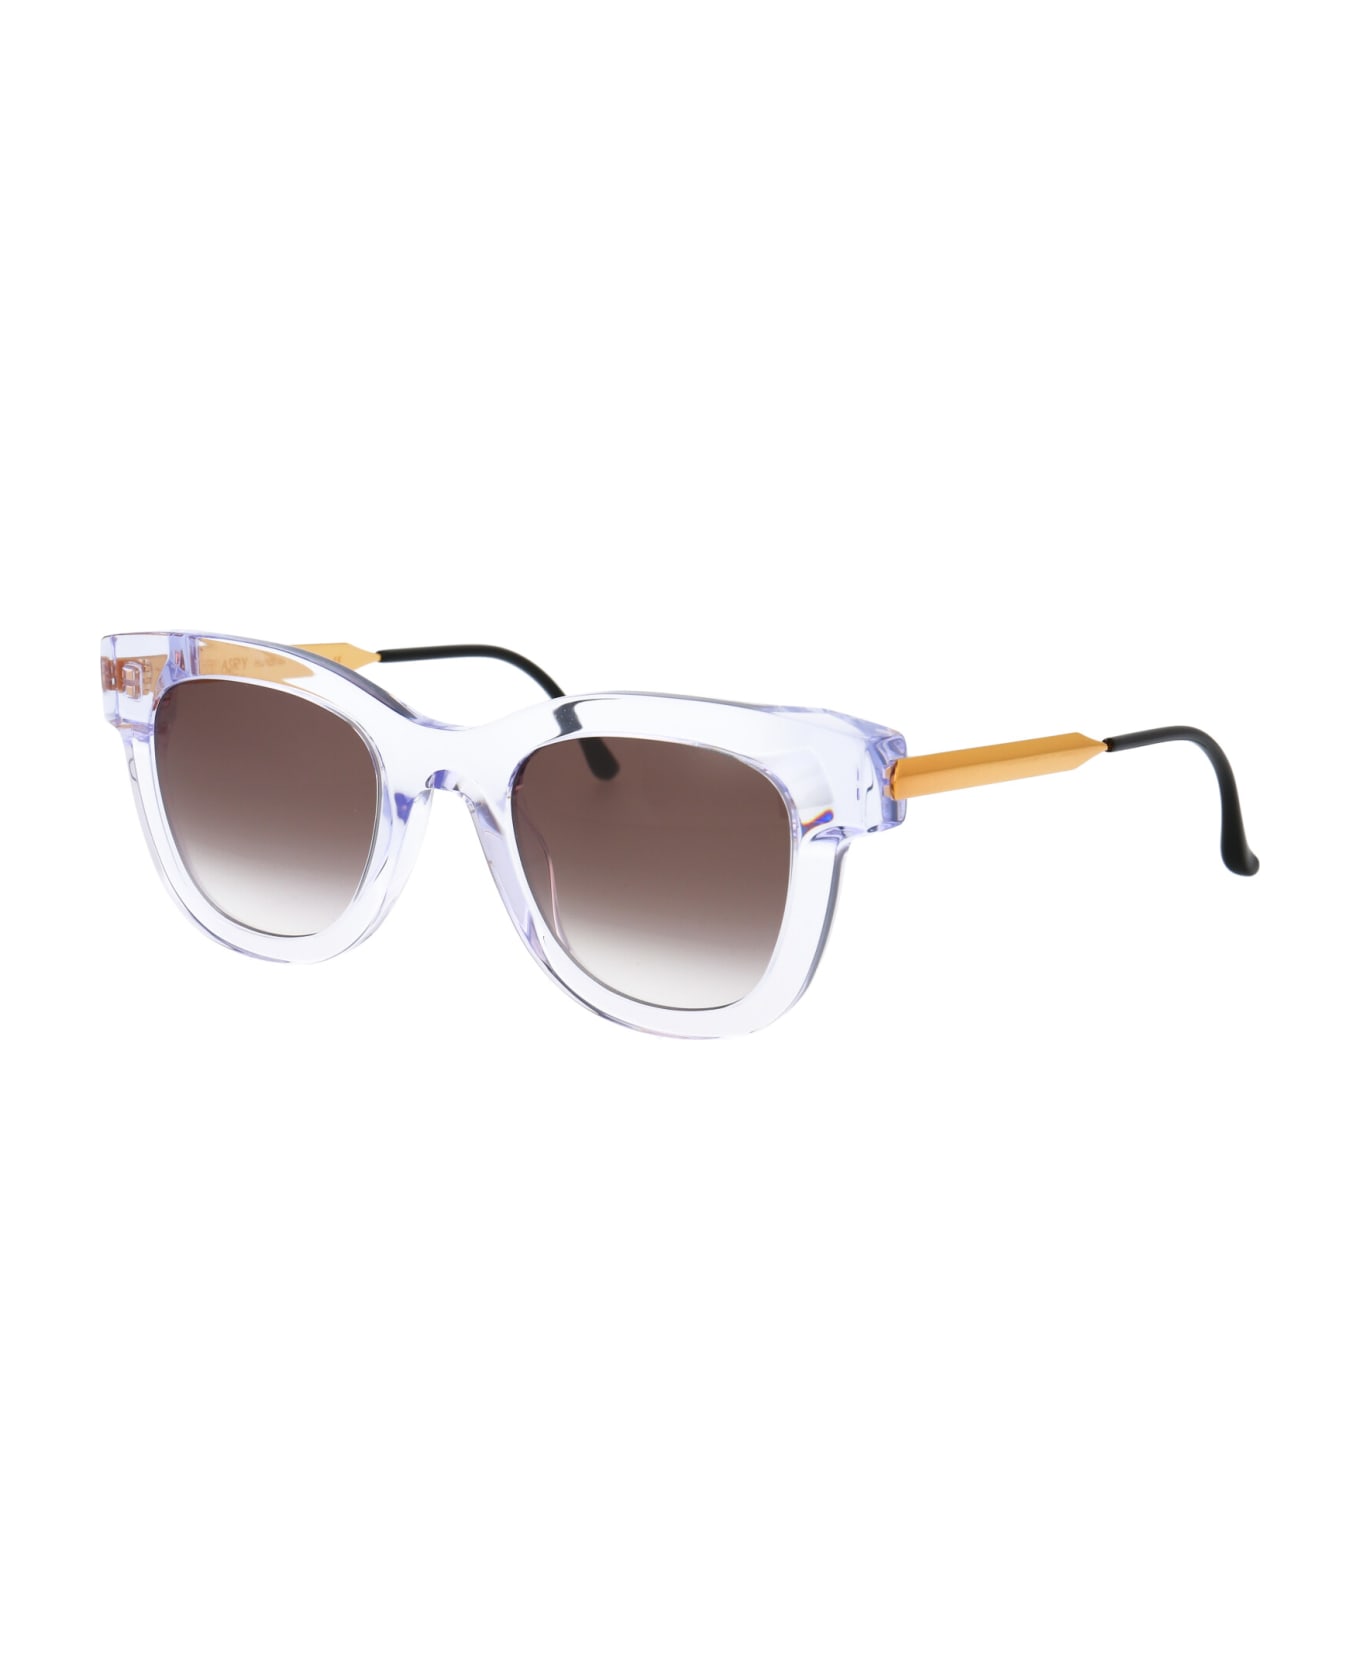 Thierry Lasry Sexxxy Sunglasses - 00 CRYSTAL